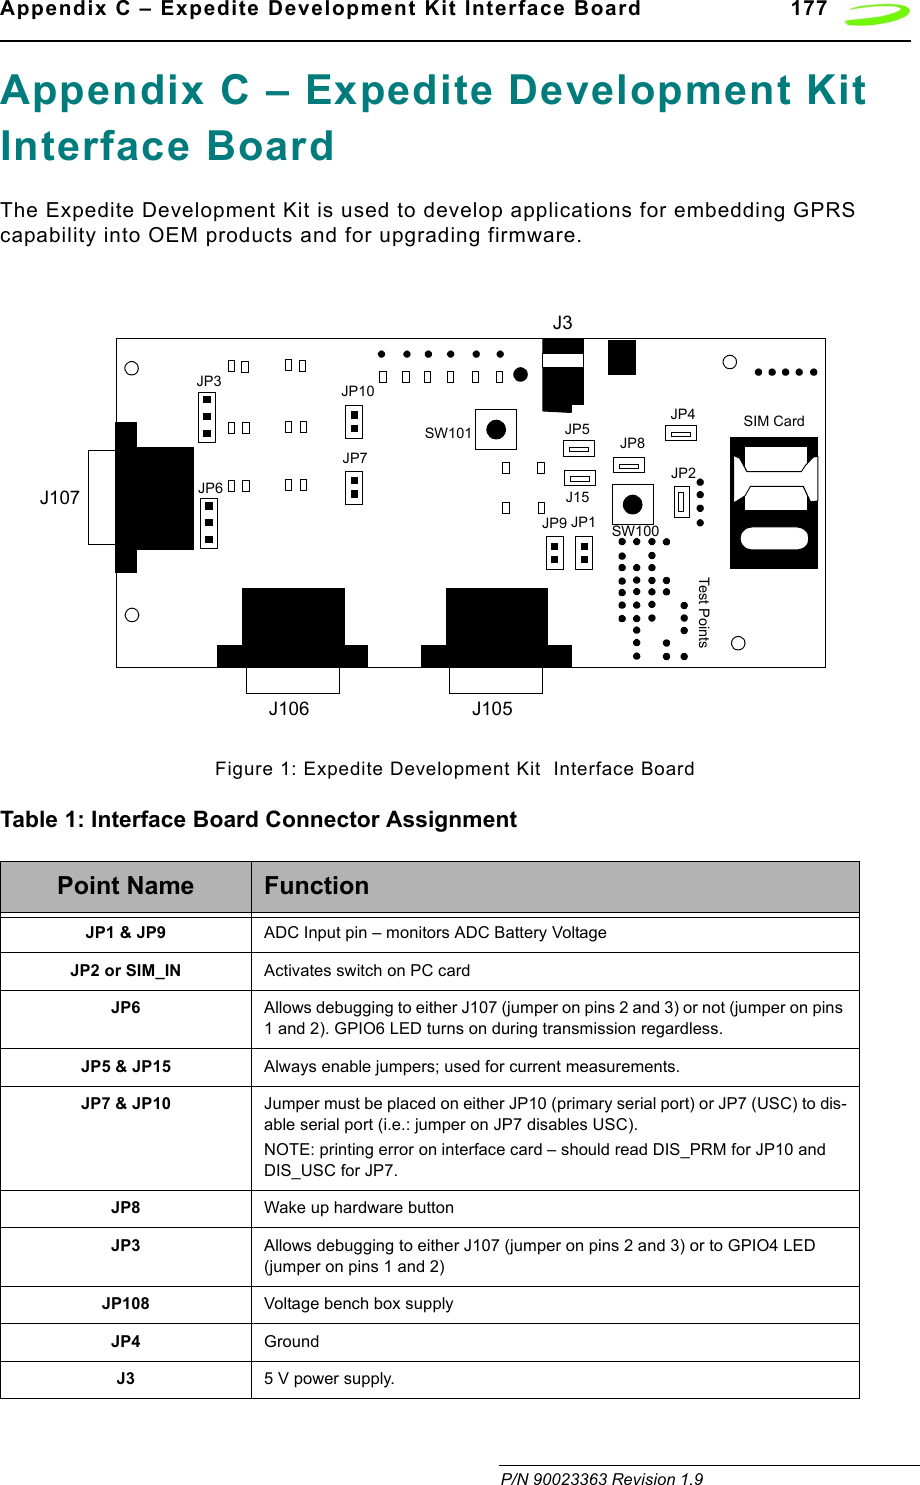 Appendix C – Expedite Development Kit Interface Board 177 P/N 90023363 Revision 1.9Appendix C – Expedite Development Kit Interface BoardThe Expedite Development Kit is used to develop applications for embedding GPRS capability into OEM products and for upgrading firmware.Figure 1: Expedite Development Kit  Interface BoardTable 1: Interface Board Connector AssignmentPoint Name FunctionJP1 &amp; JP9 ADC Input pin – monitors ADC Battery VoltageJP2 or SIM_IN Activates switch on PC cardJP6 Allows debugging to either J107 (jumper on pins 2 and 3) or not (jumper on pins 1 and 2). GPIO6 LED turns on during transmission regardless.JP5 &amp; JP15 Always enable jumpers; used for current measurements.JP7 &amp; JP10 Jumper must be placed on either JP10 (primary serial port) or JP7 (USC) to dis-able serial port (i.e.: jumper on JP7 disables USC). NOTE: printing error on interface card – should read DIS_PRM for JP10 and DIS_USC for JP7.JP8 Wake up hardware buttonJP3 Allows debugging to either J107 (jumper on pins 2 and 3) or to GPIO4 LED (jumper on pins 1 and 2)JP108 Voltage bench box supplyJP4 GroundJ3 5 V power supply.J106 J105J107Test Po intsJ3JP3JP6JP10JP7JP9 JP1JP4JP8JP5J15JP2SW101SW100SIM Card